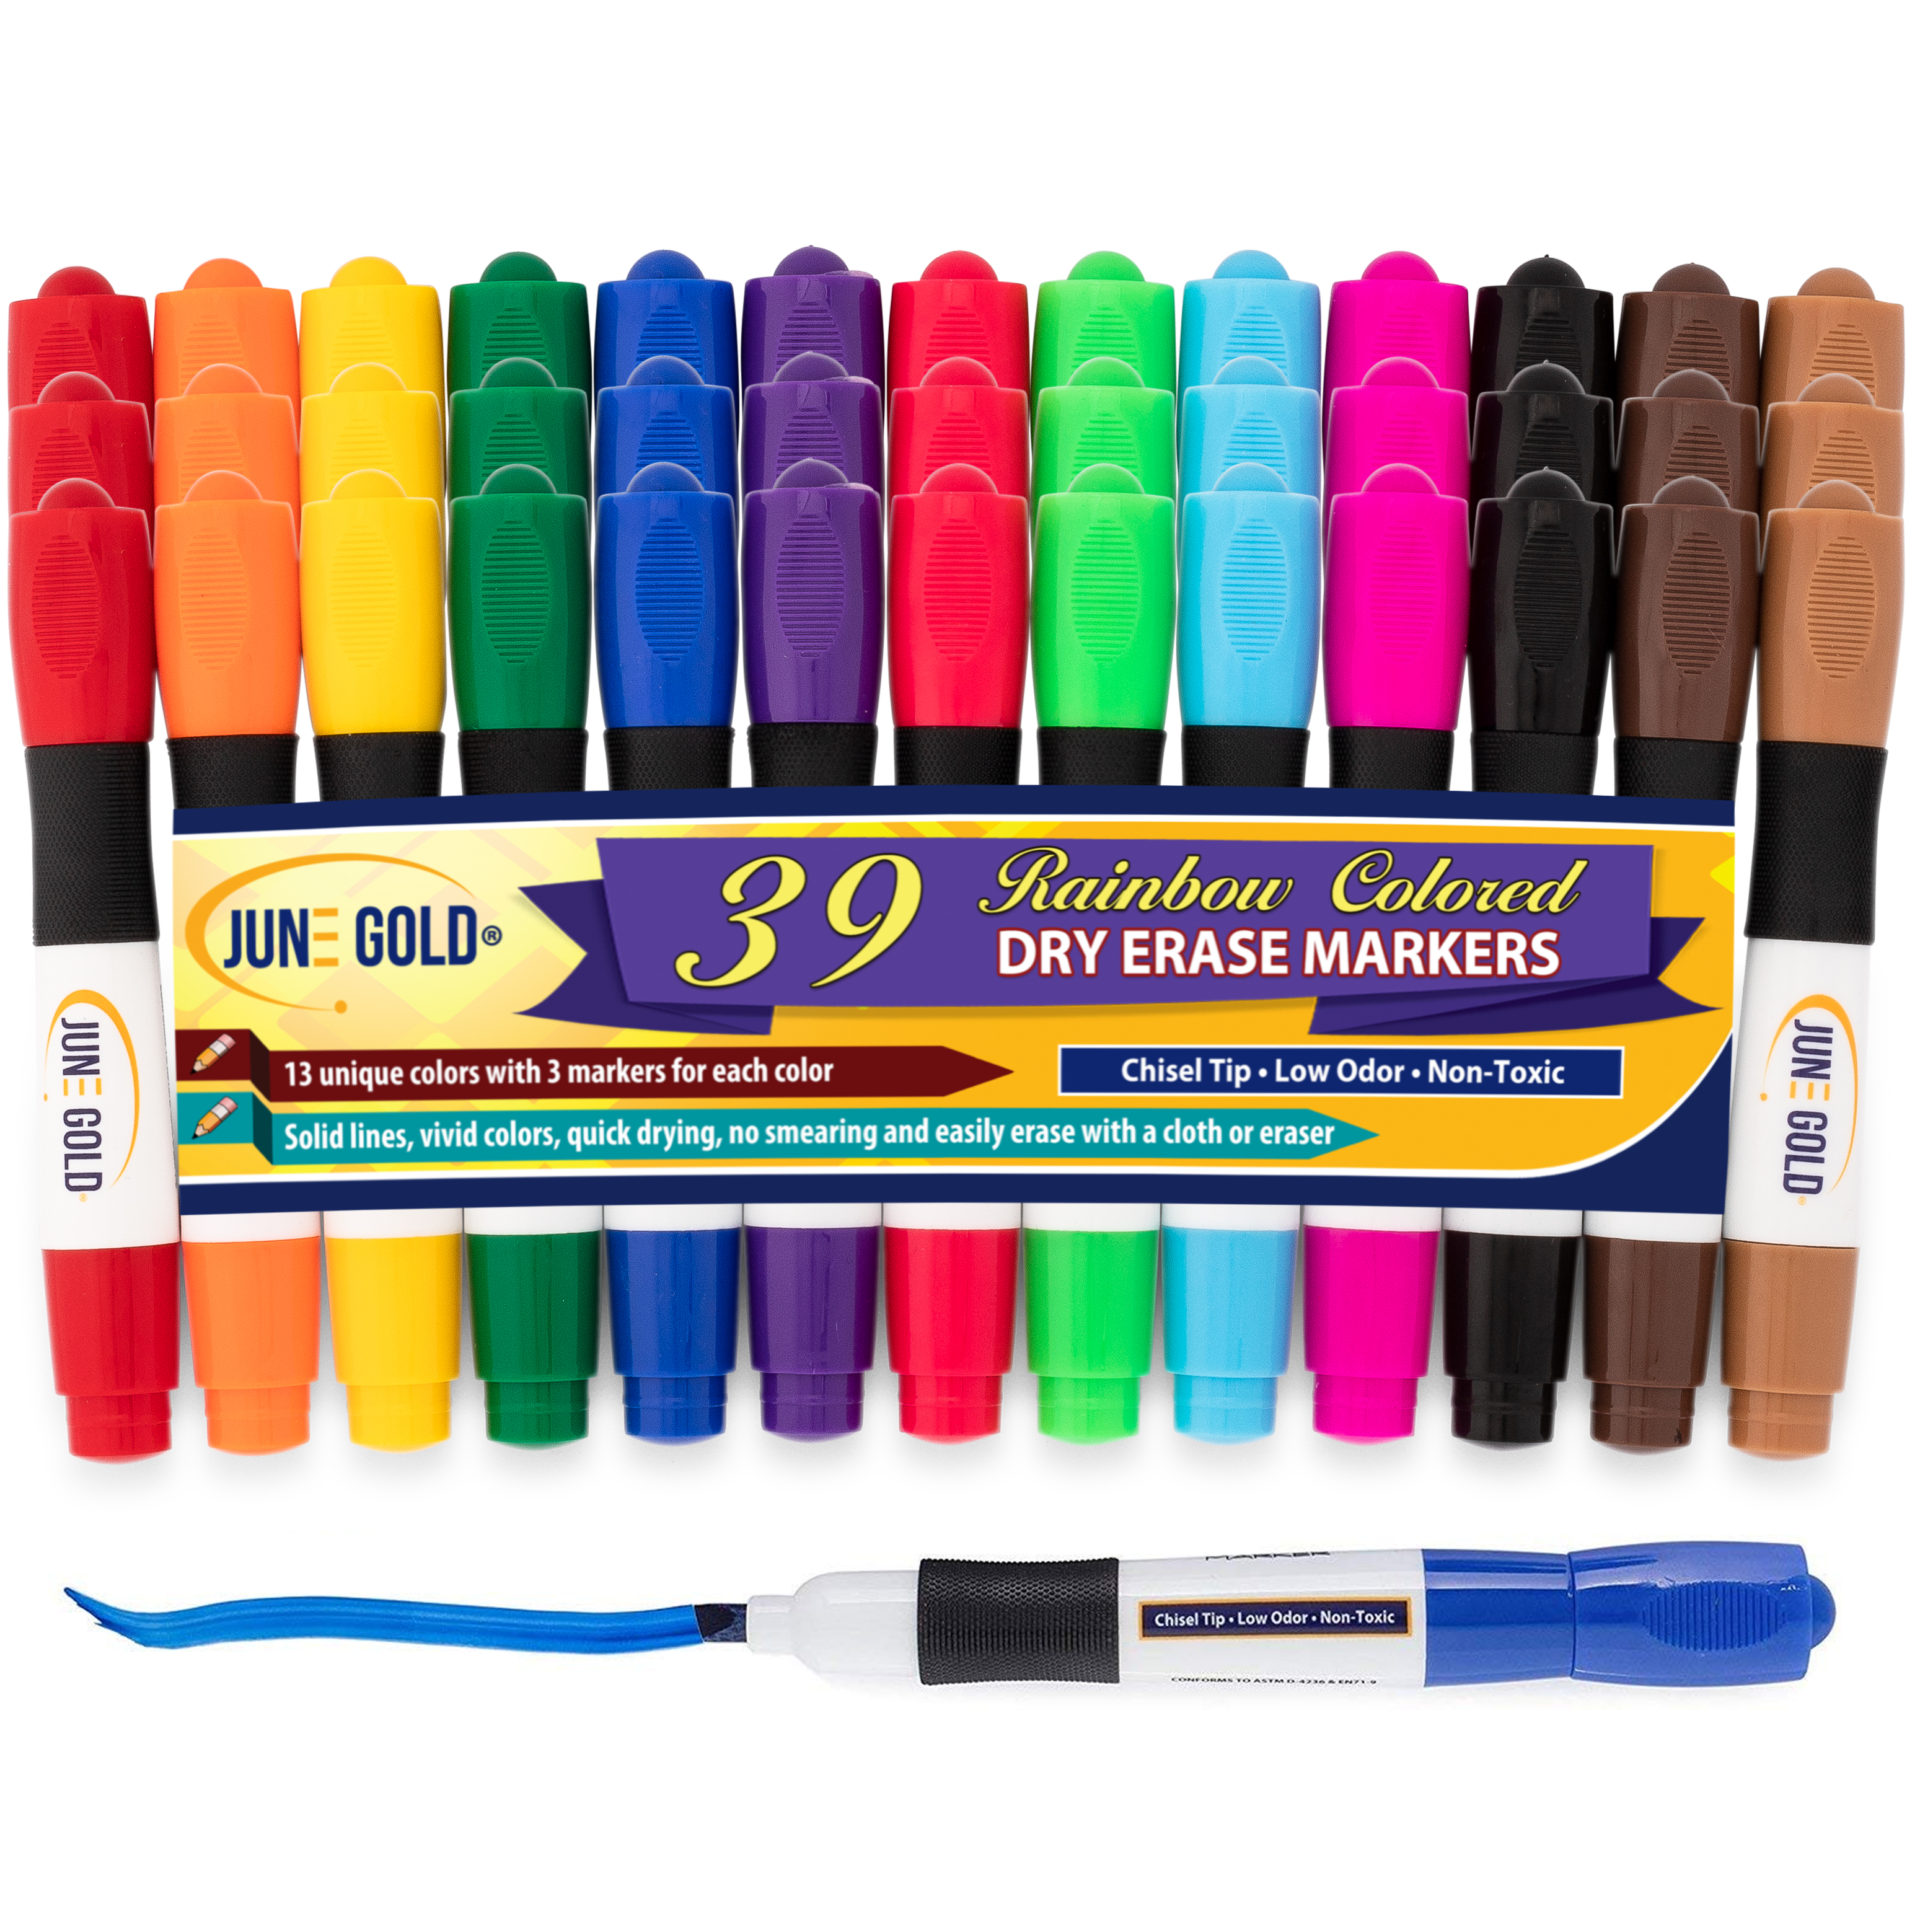 Dry Erase Markers – June Gold